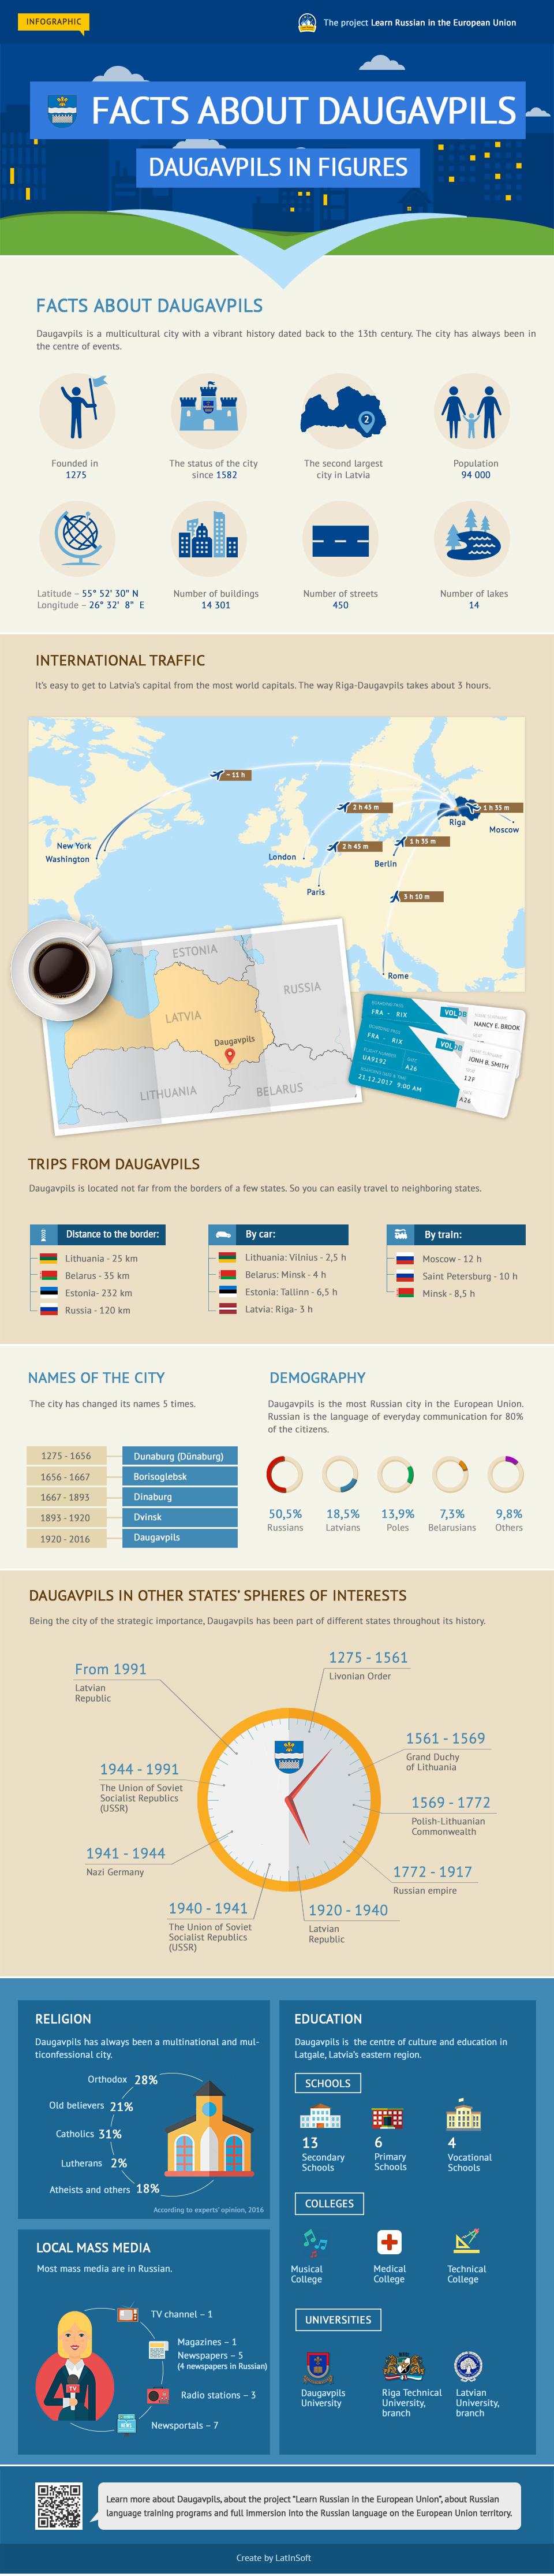 Infographic: Facts about Daugavpils